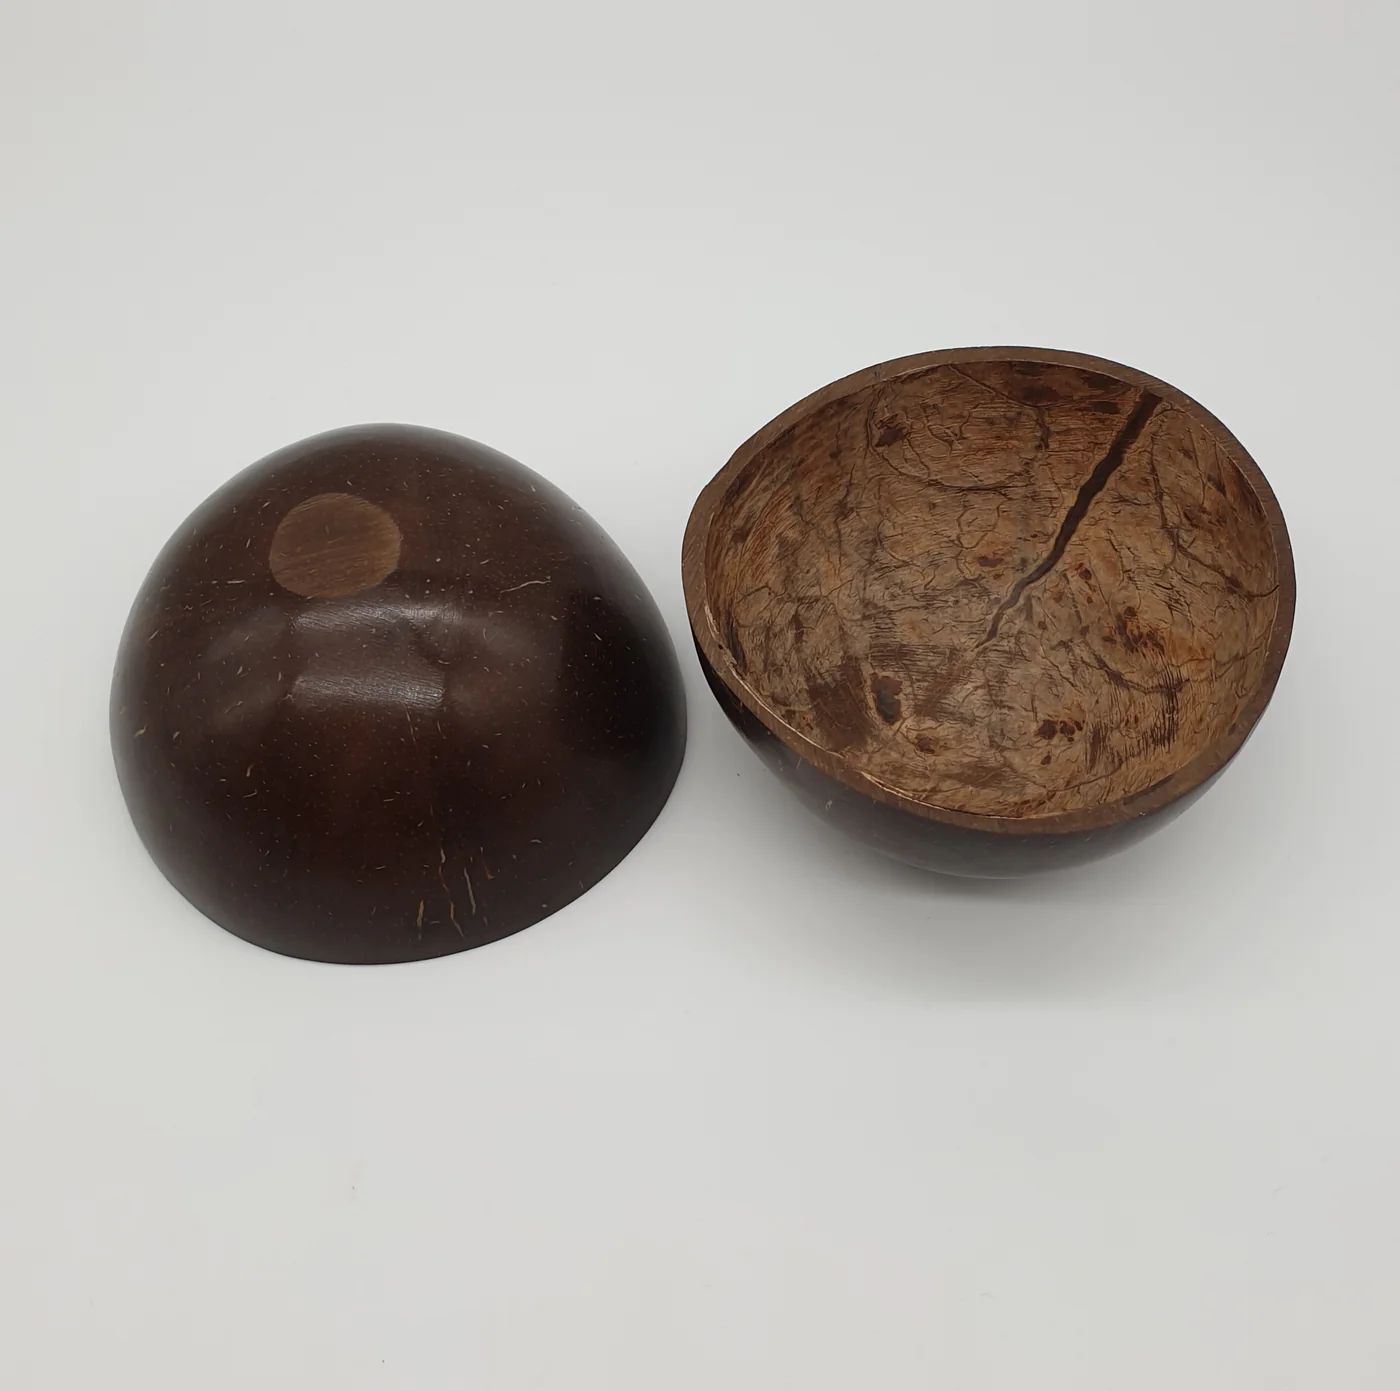 Wholesale Polished Coconut Shell Bowls 200ml - Eco Leaf Products